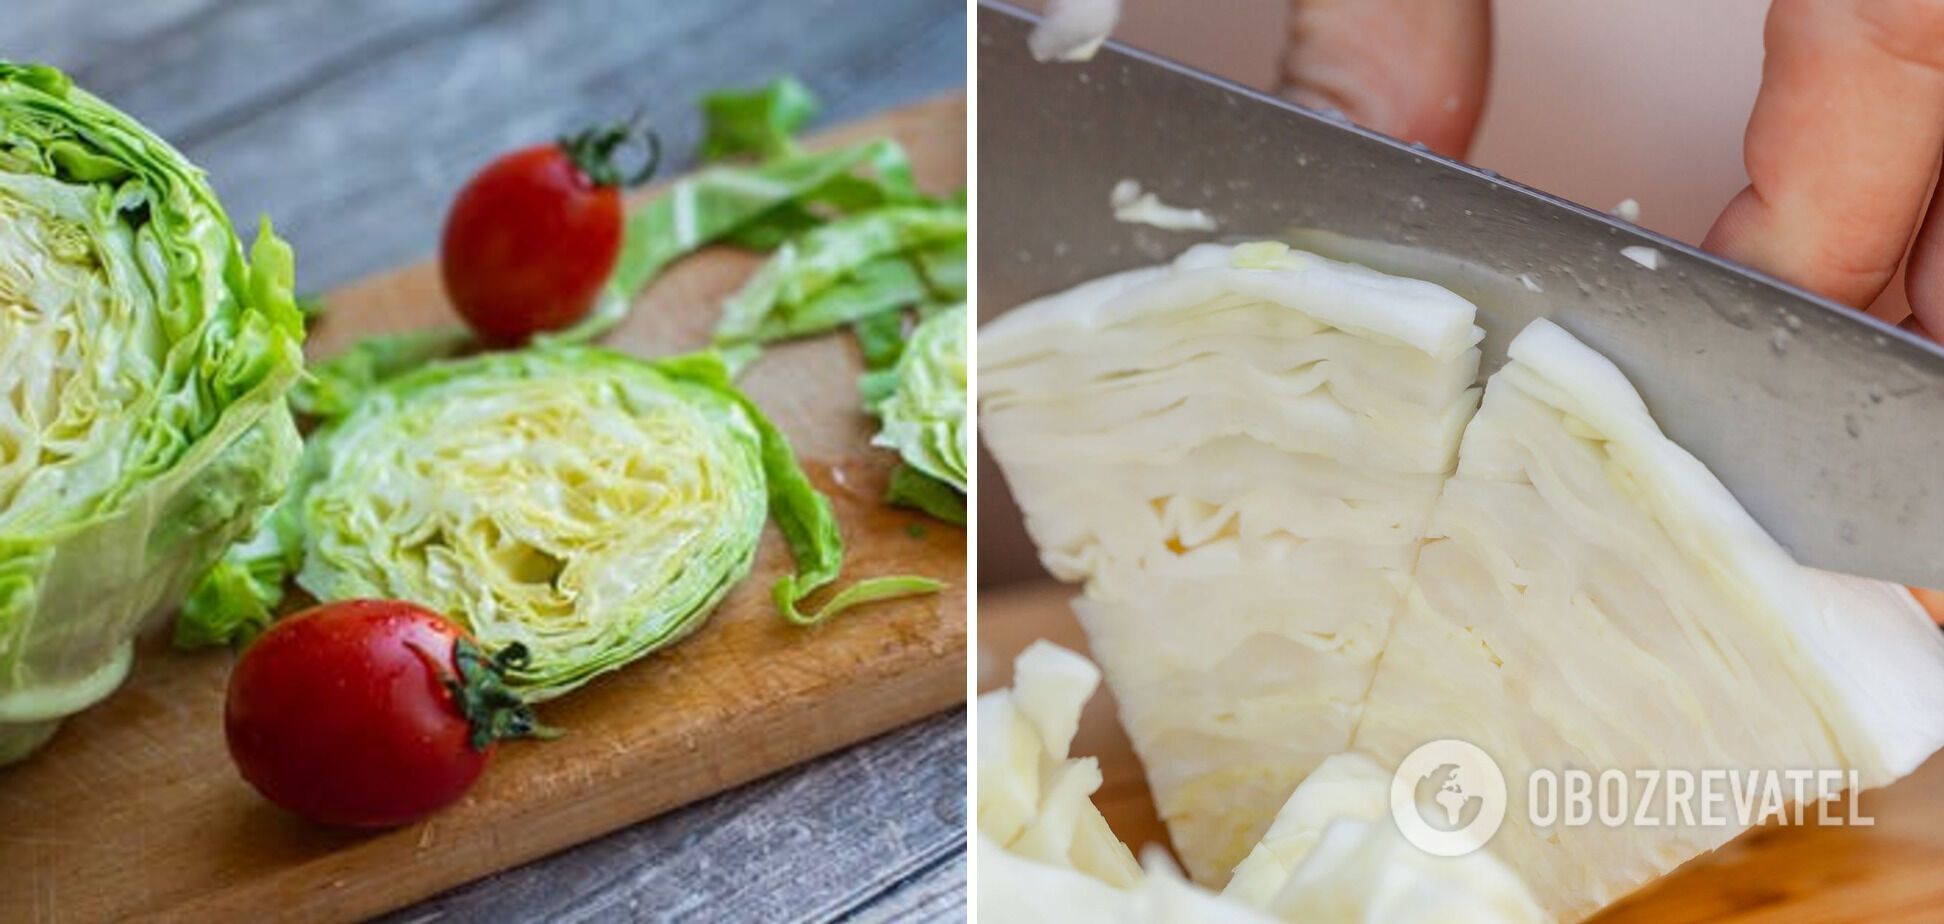 What to cook with cabbage